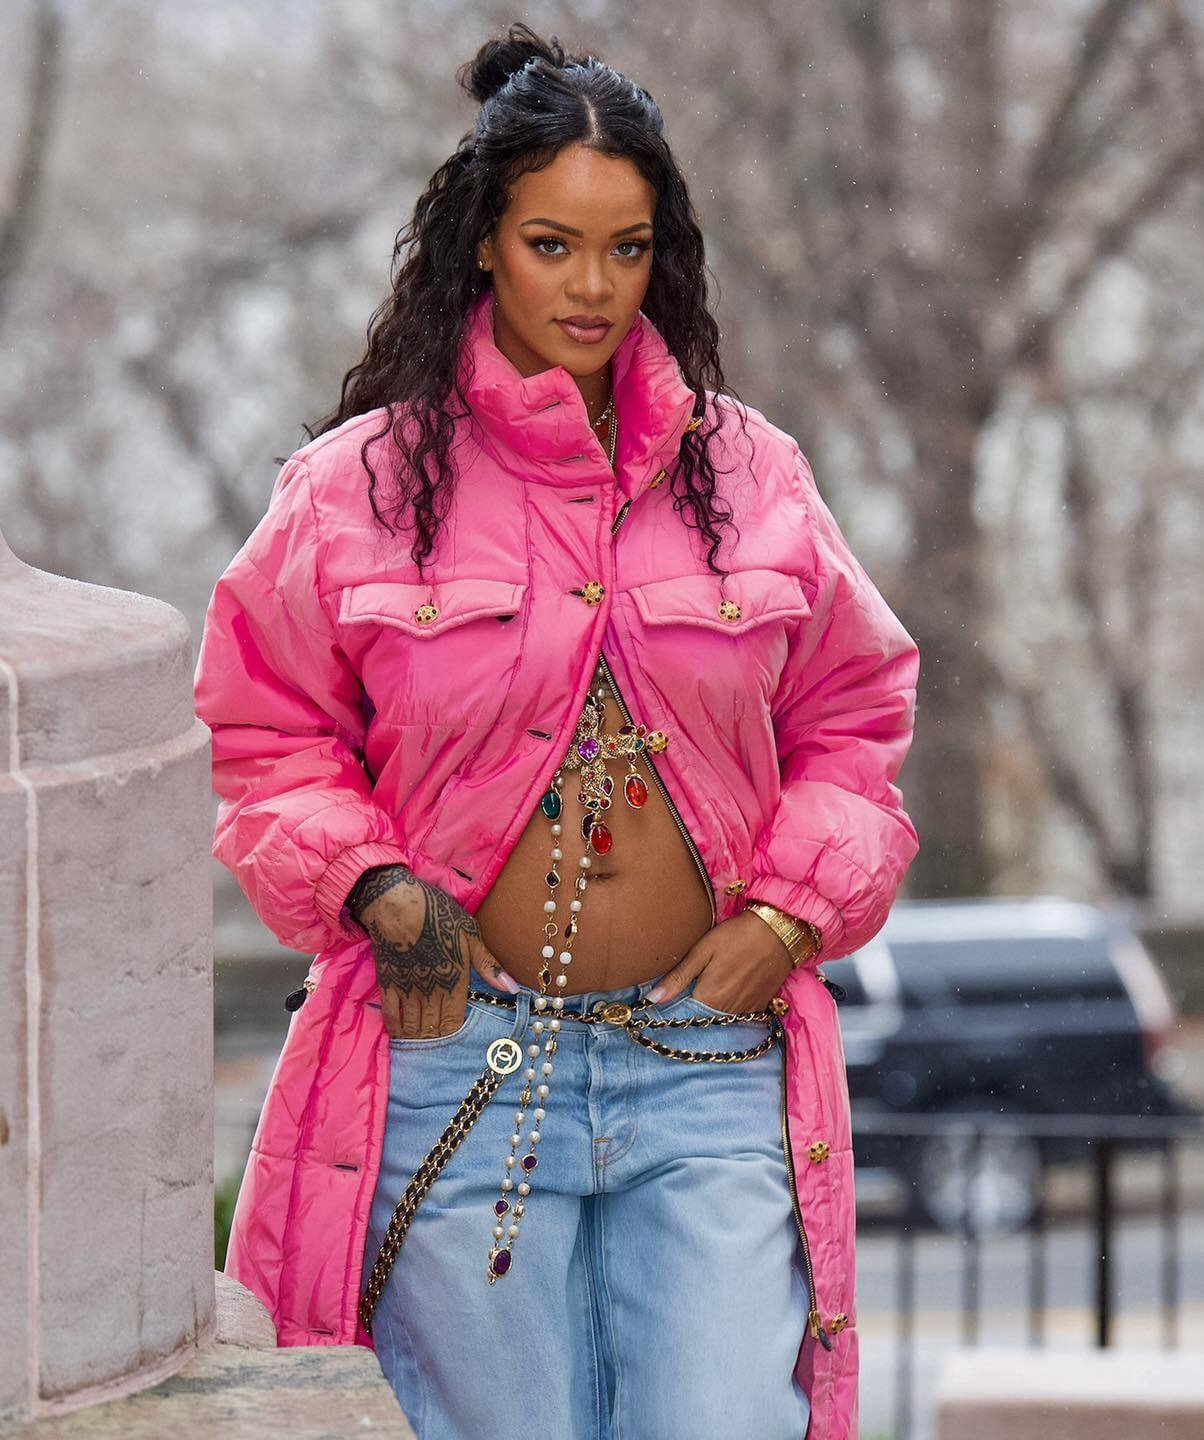 Rihanna goes down the street with her boyfriend with a big belly